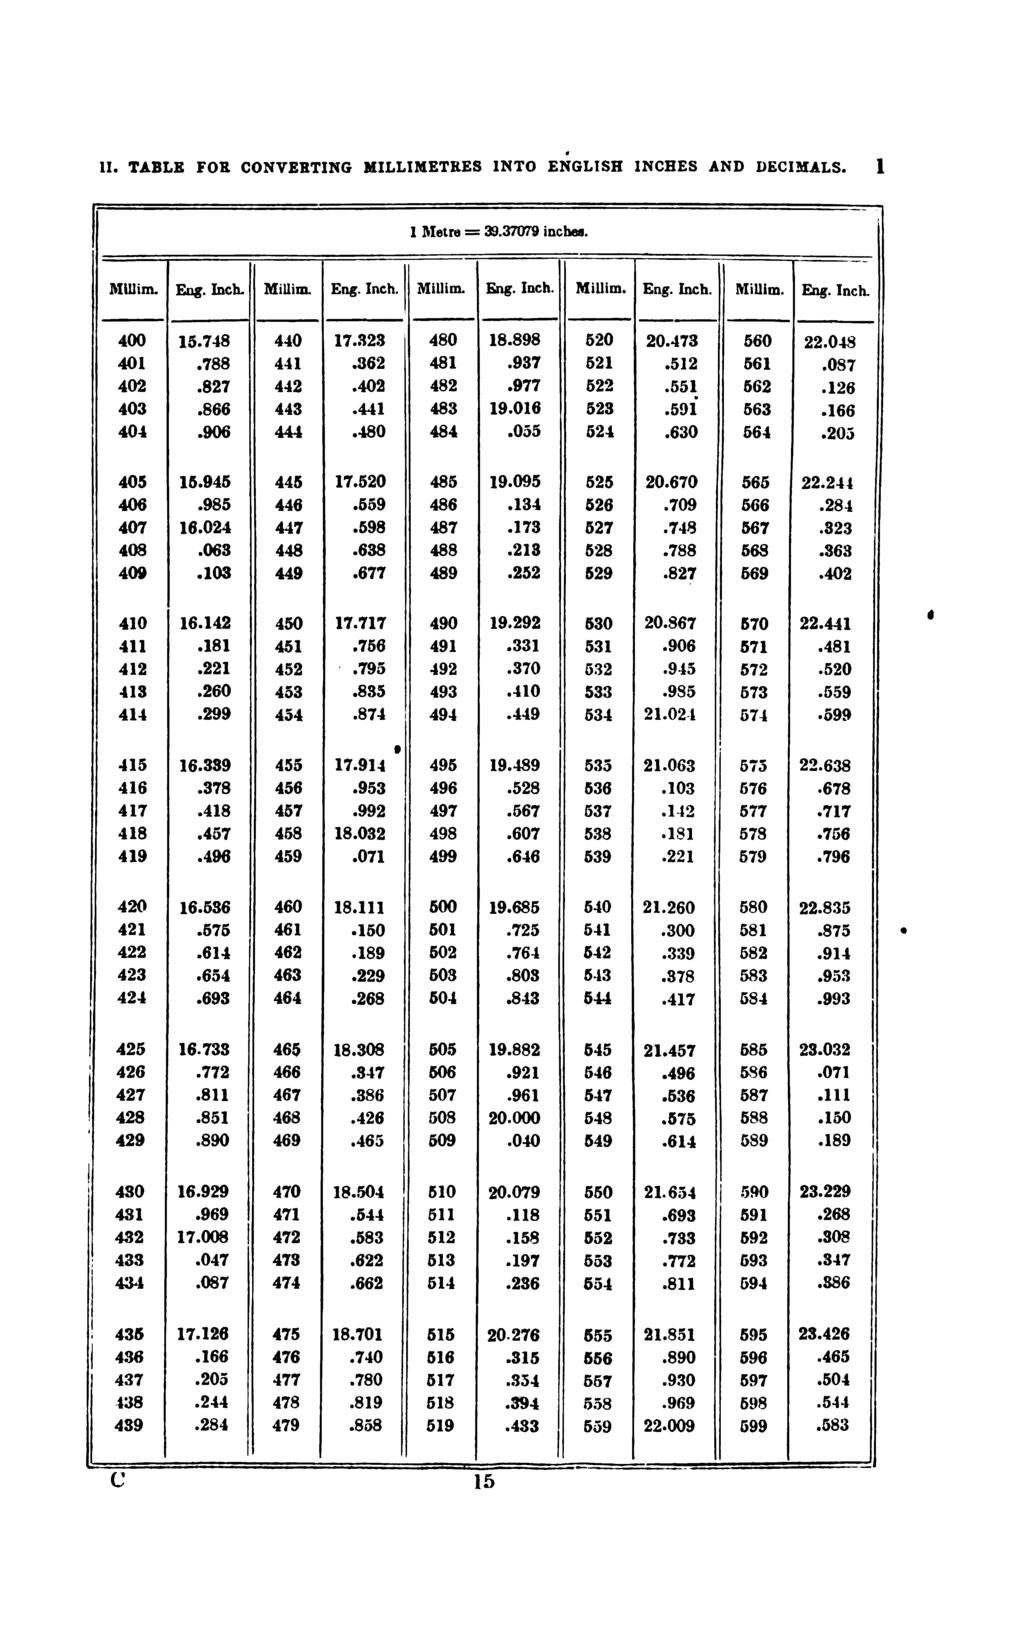 11. TABLE FOR CONVERTING MILLIMETRES INTO ENGLISH INCHES AND DECIMALS. 1 1 Metre = 39.37079 inches. Millim. Eng. Inch. Millim. Eng. Inch. Millim. Eng. Inch. Millim. Eng. Inch. Millim. Eng. Inch. 400 15.